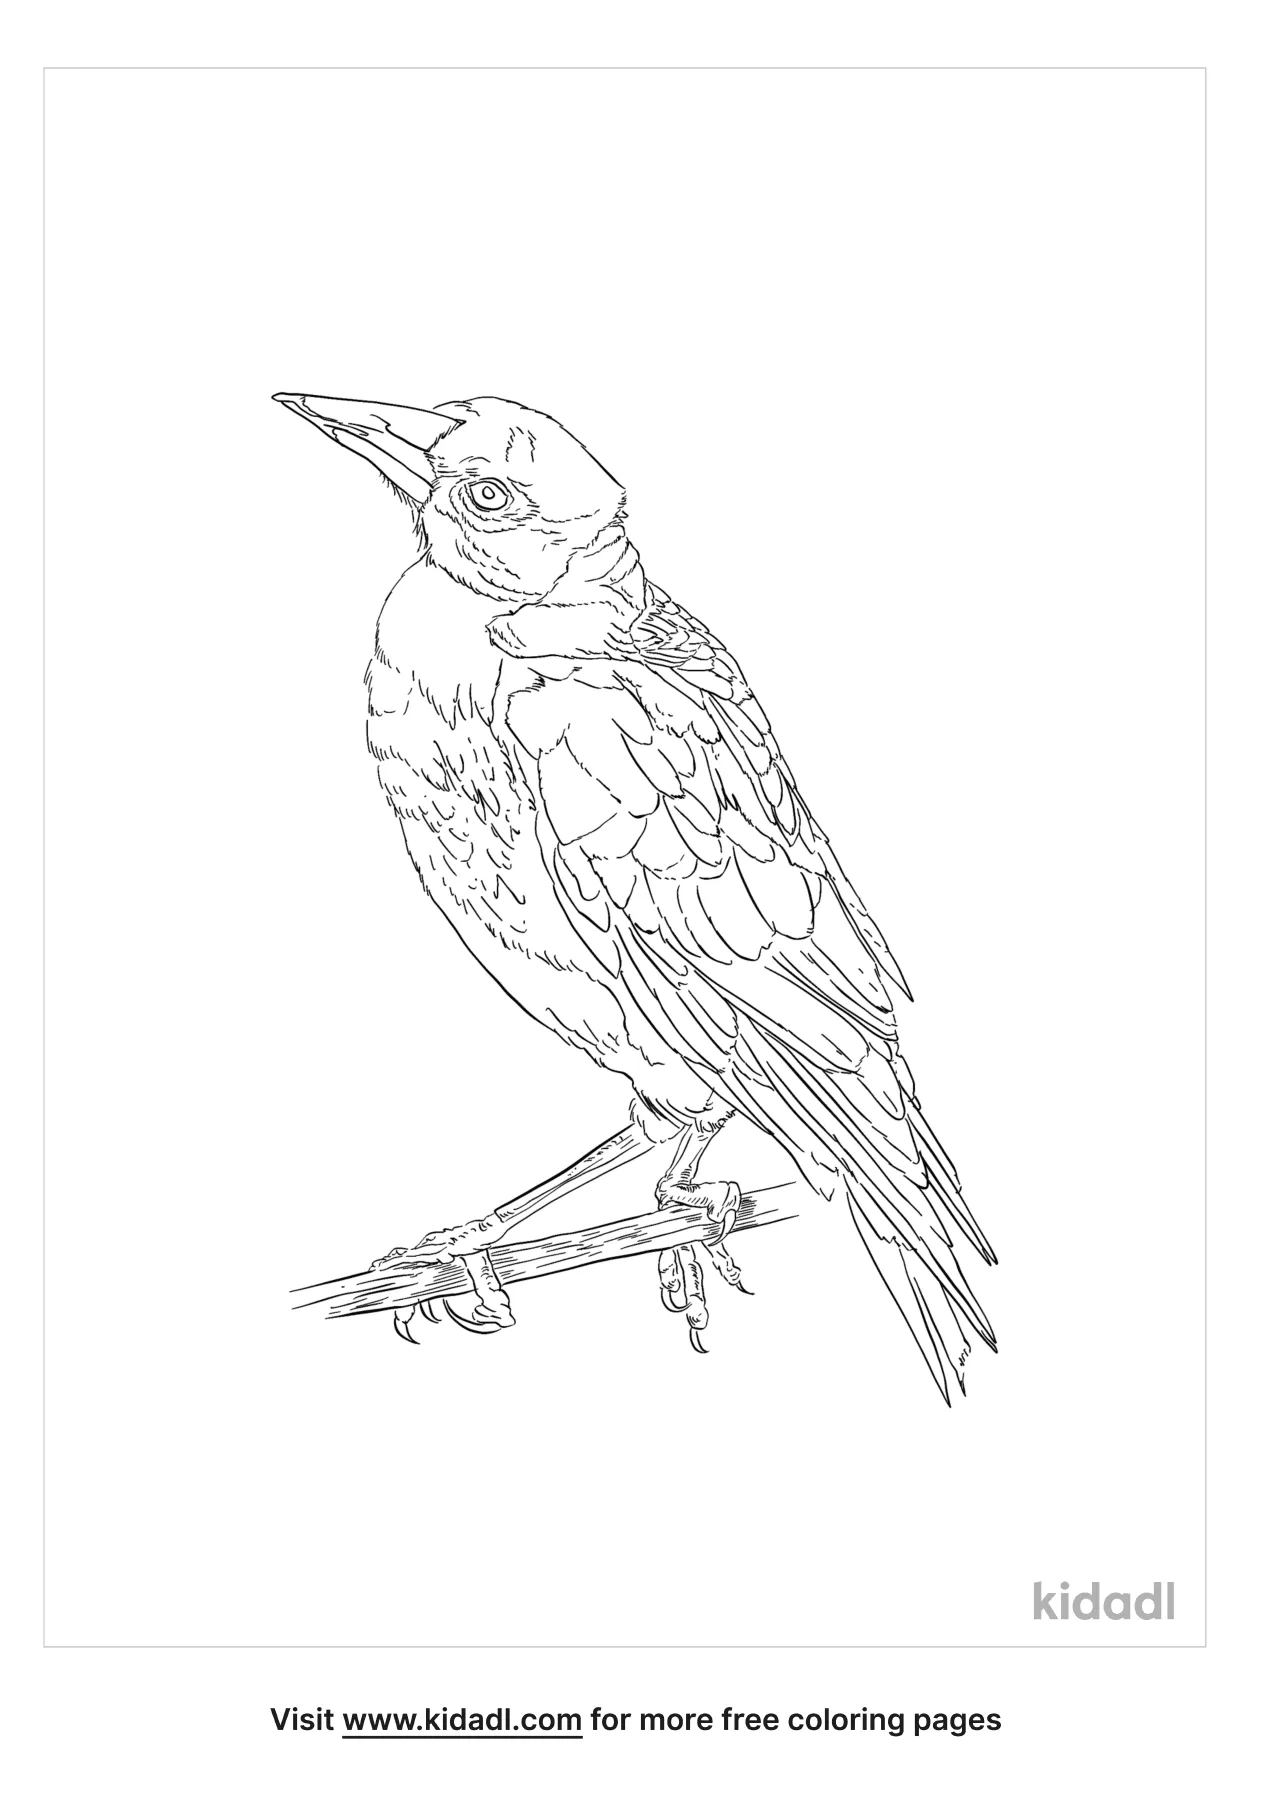 Morningbird Coloring Page